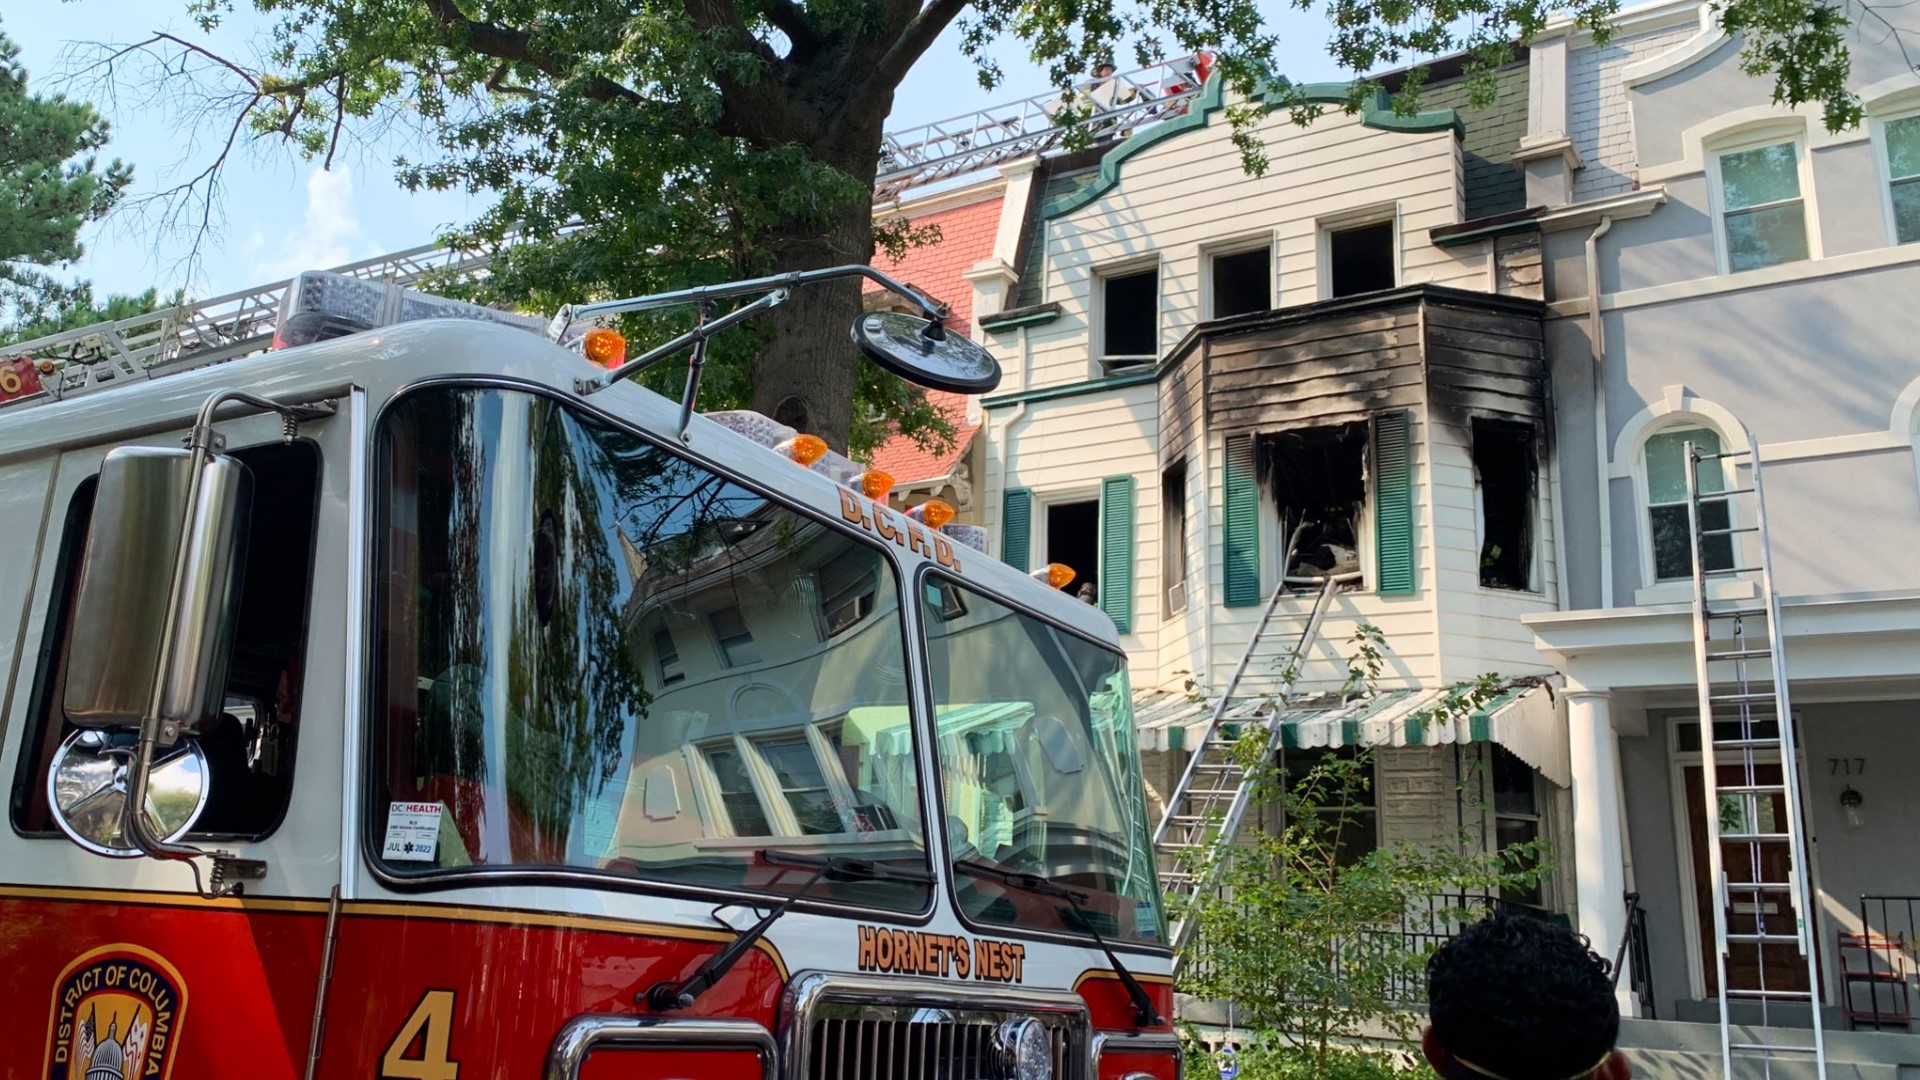 The fire caused significant damage to the 2nd floor, three-story home, which was occupied at the time of the fire, according to DC Fire.